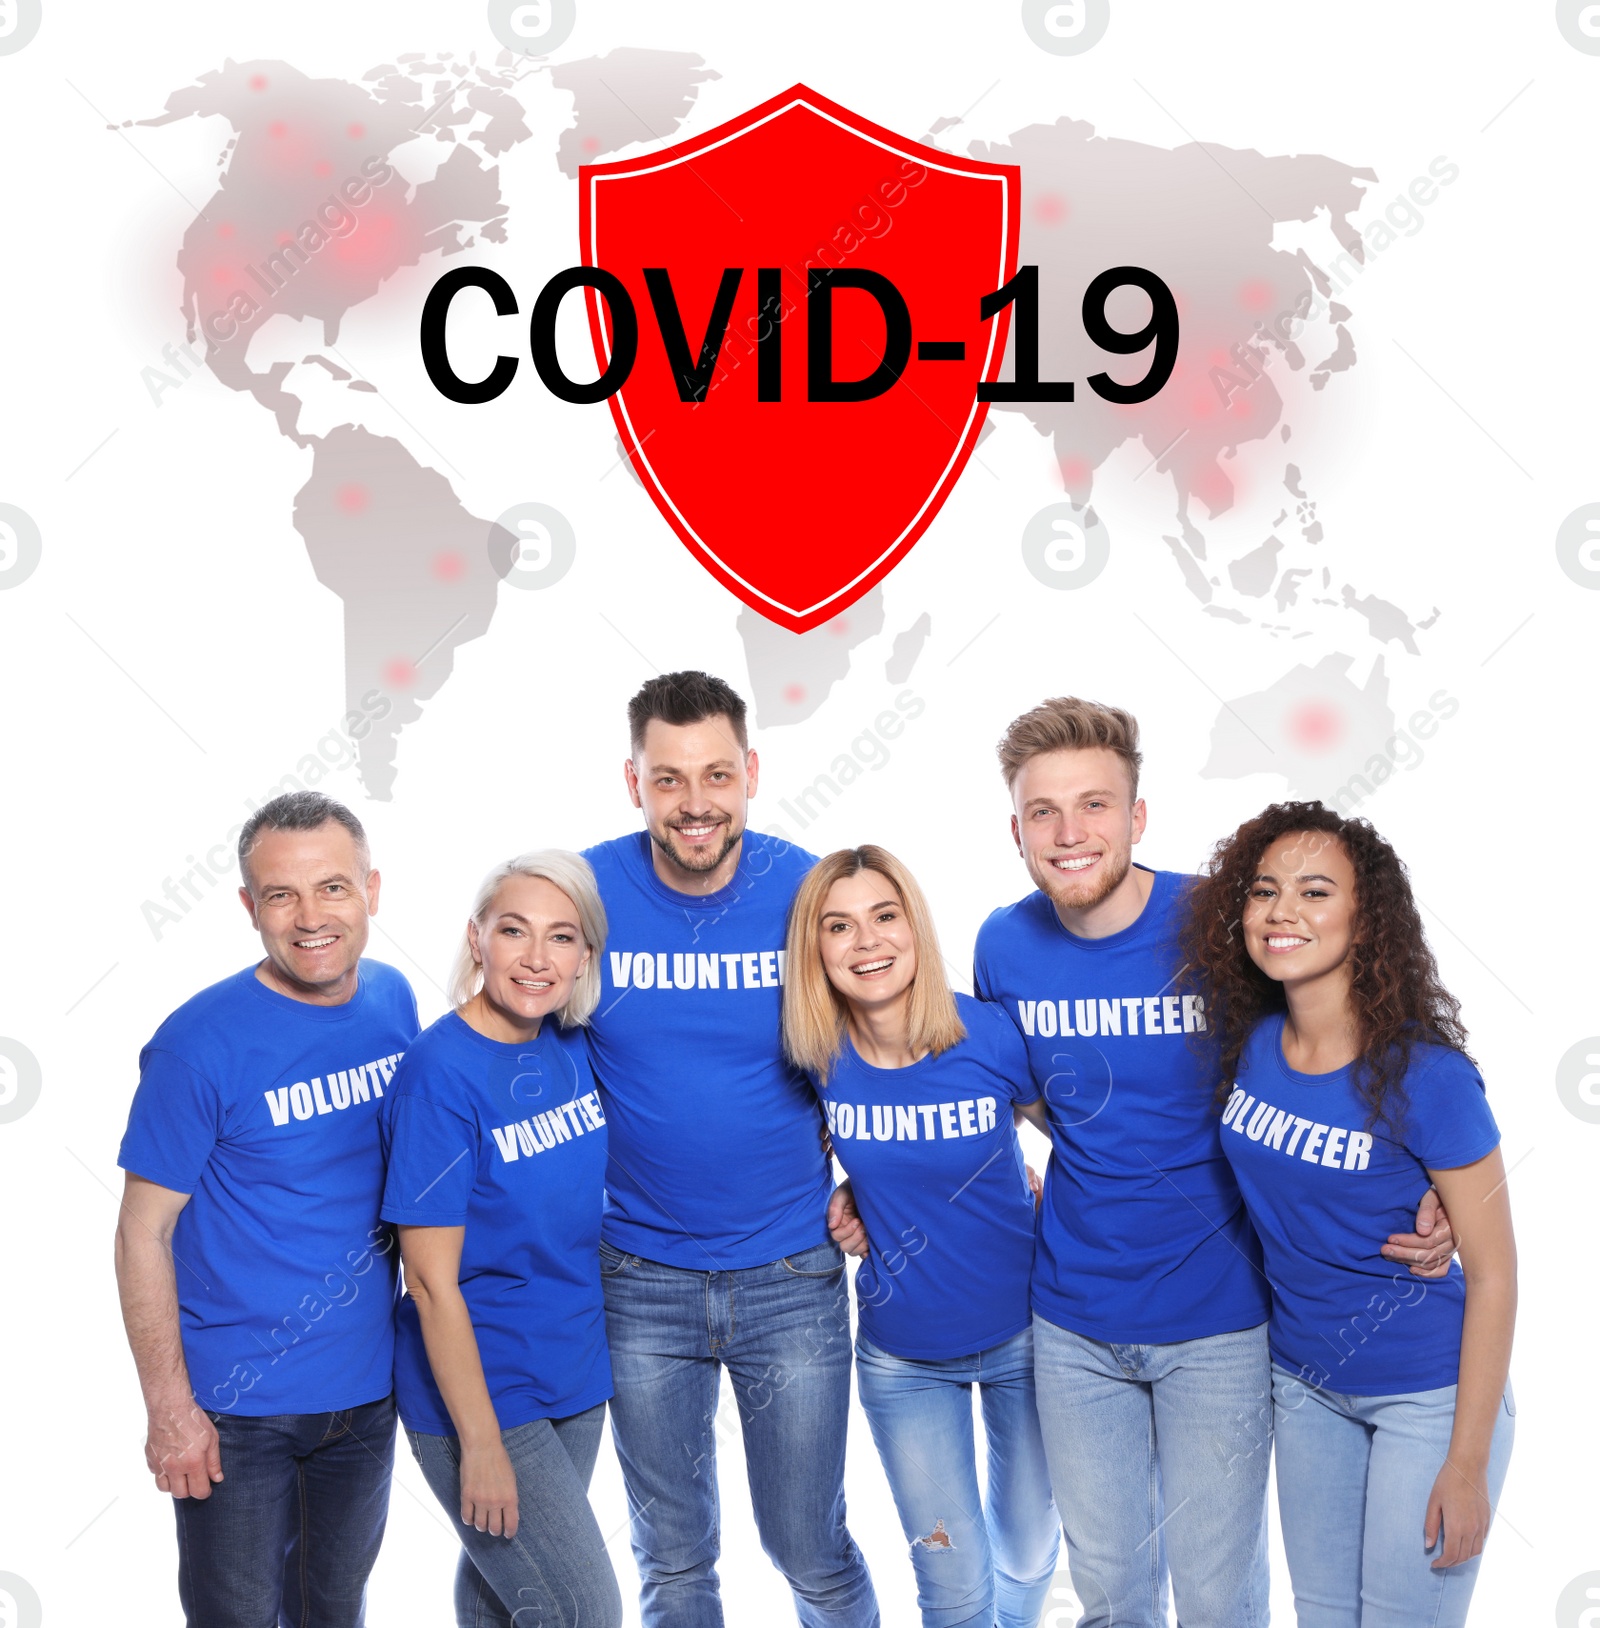 Image of Volunteers uniting to help during COVID-19 outbreak. Group of people on white background, world map and shield illustrations